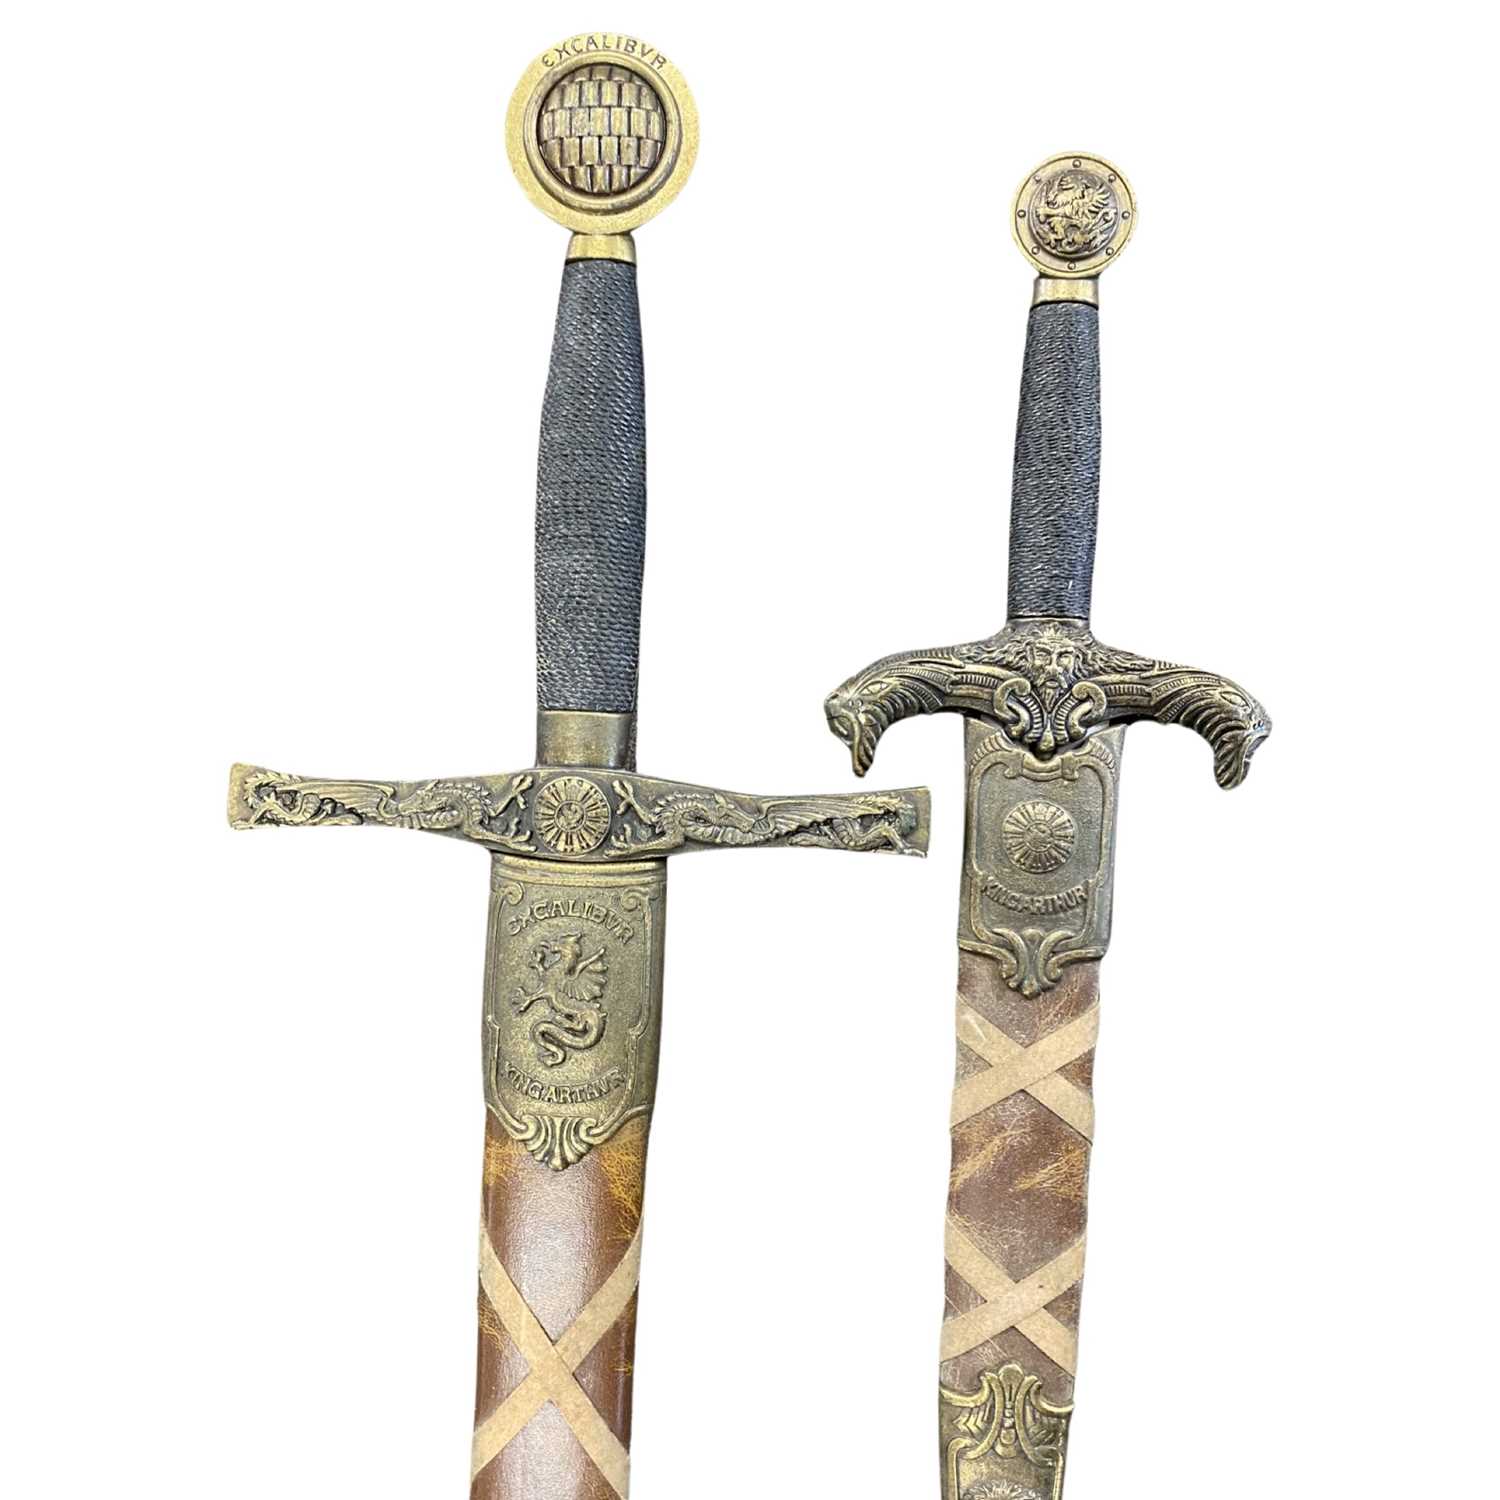 A replica of King Arthur's sword Excaliber together with a matching dagger, both in leather - Image 2 of 3